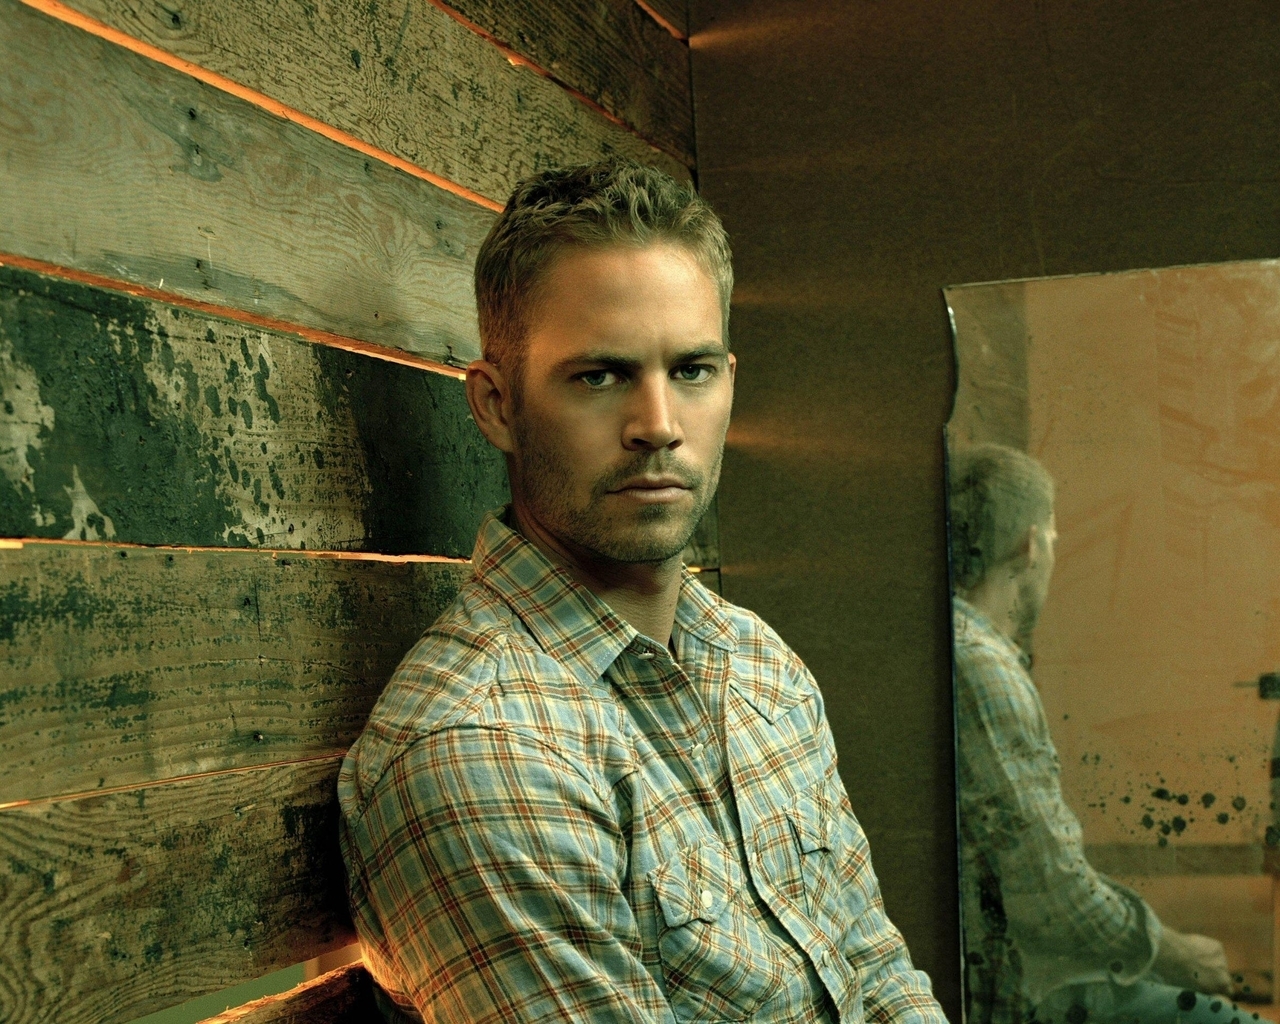 14702 download wallpaper actors, people, paul walker screensavers and pictures for free